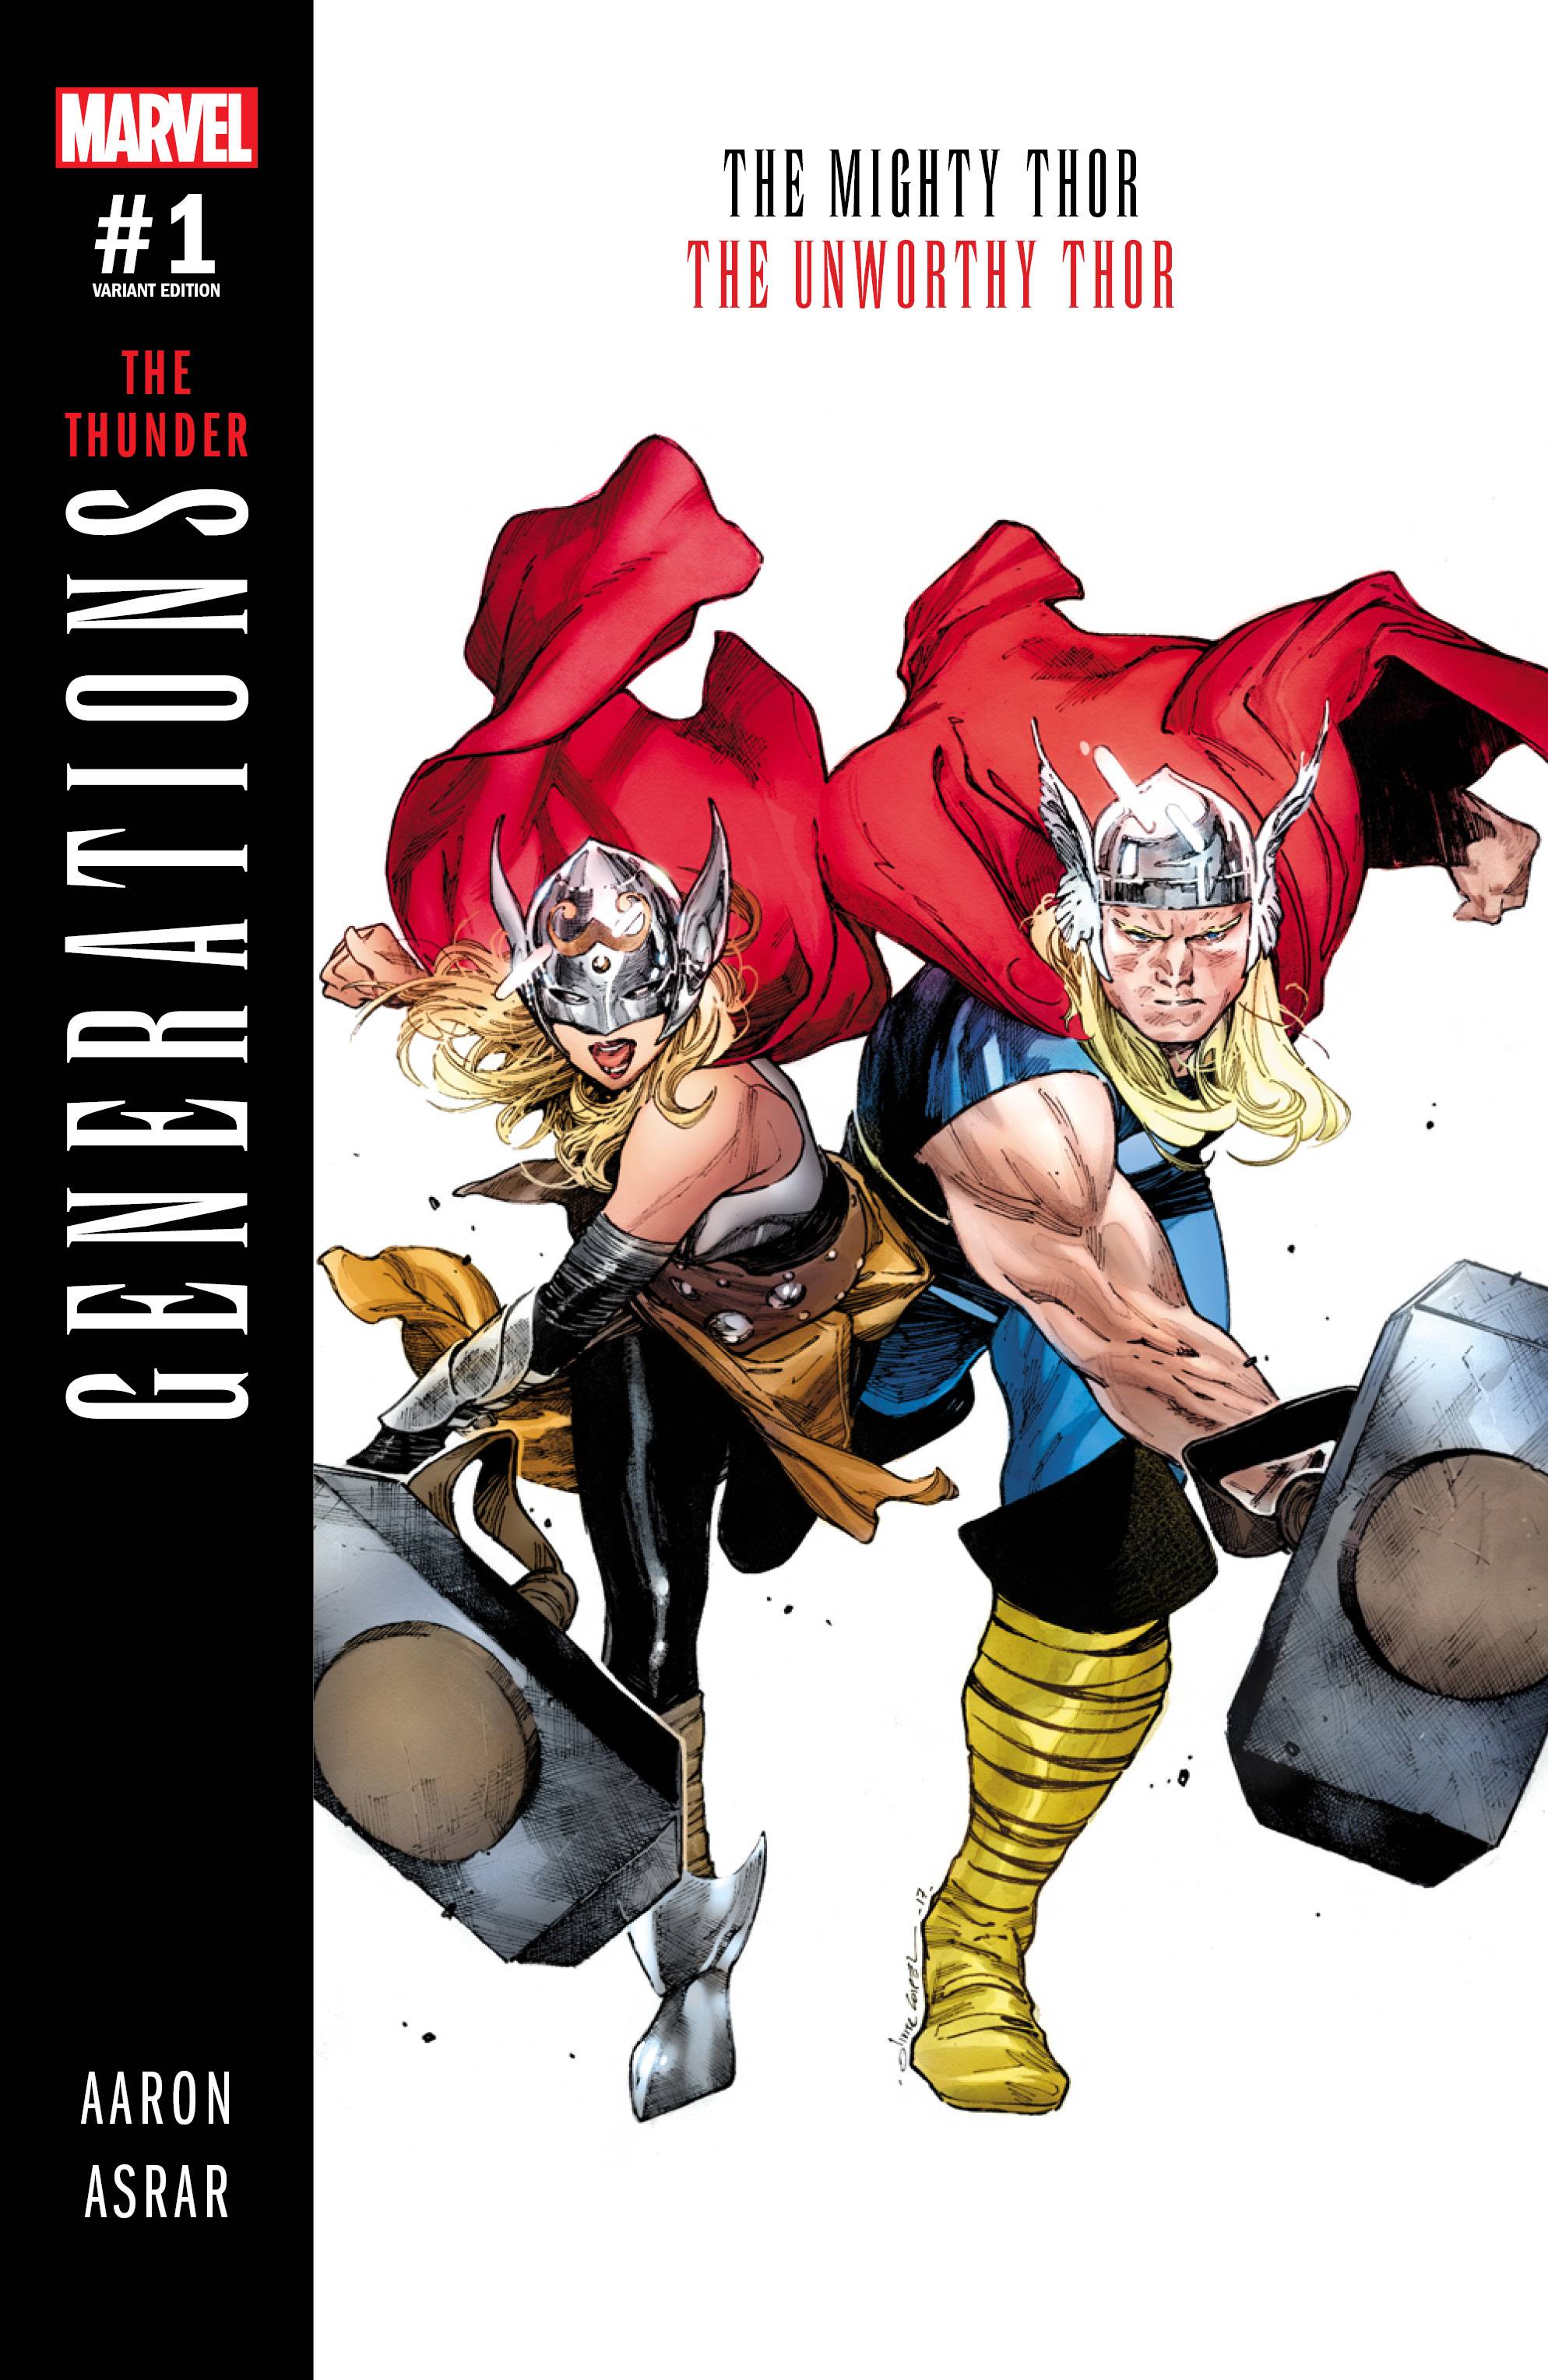 GENERATIONS: THE UNWORTHY THOR AND THE MIGHTY THOR#1